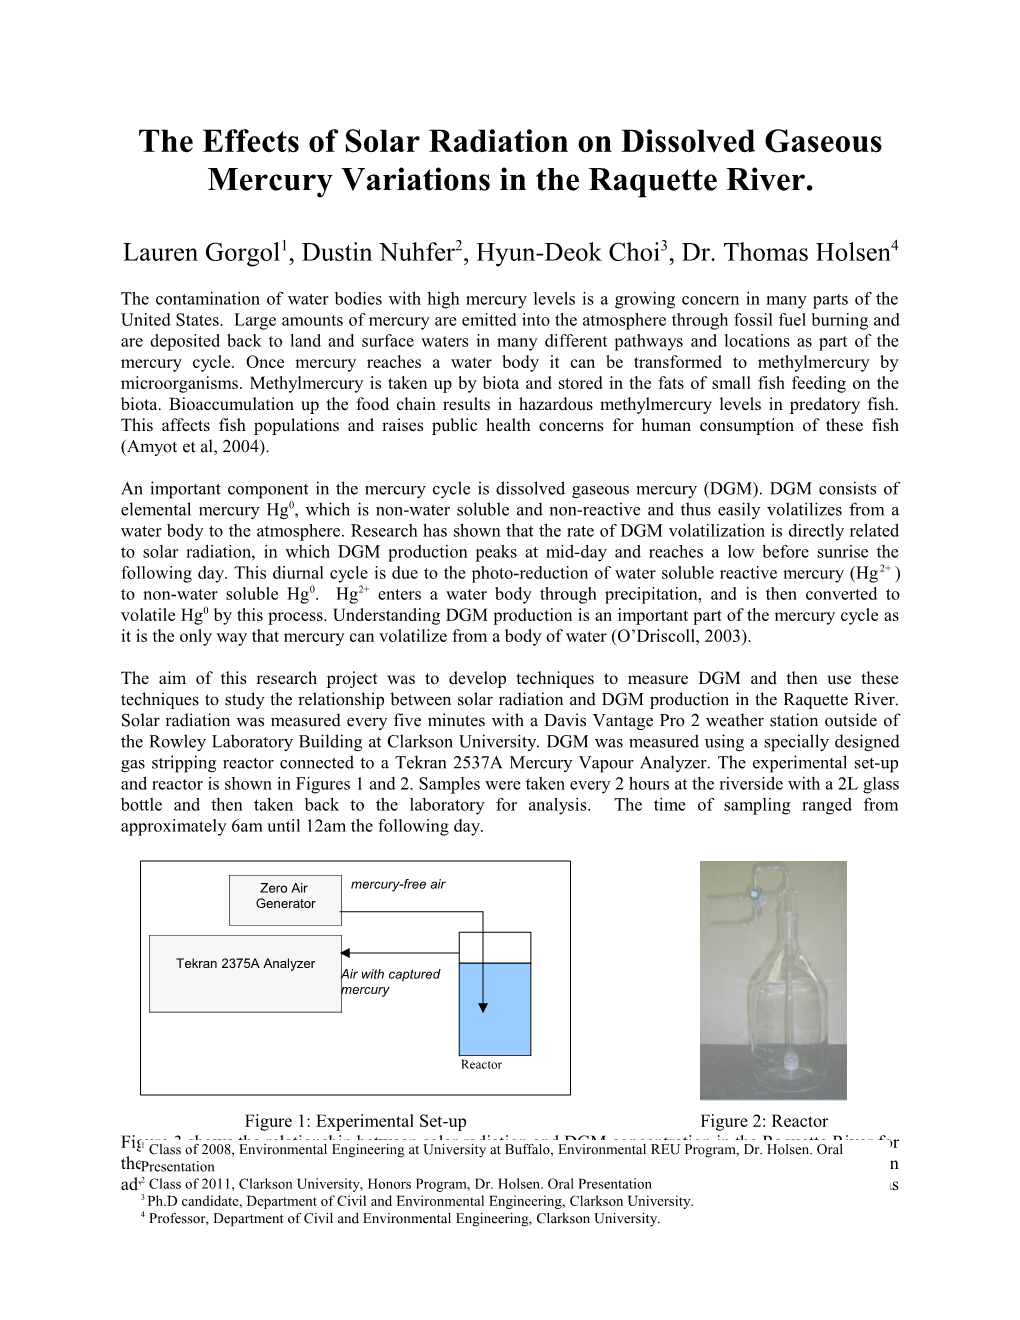 The Effects of Solar Radiation on Dissolved Gaseous Mercury Variations in the Raquette River